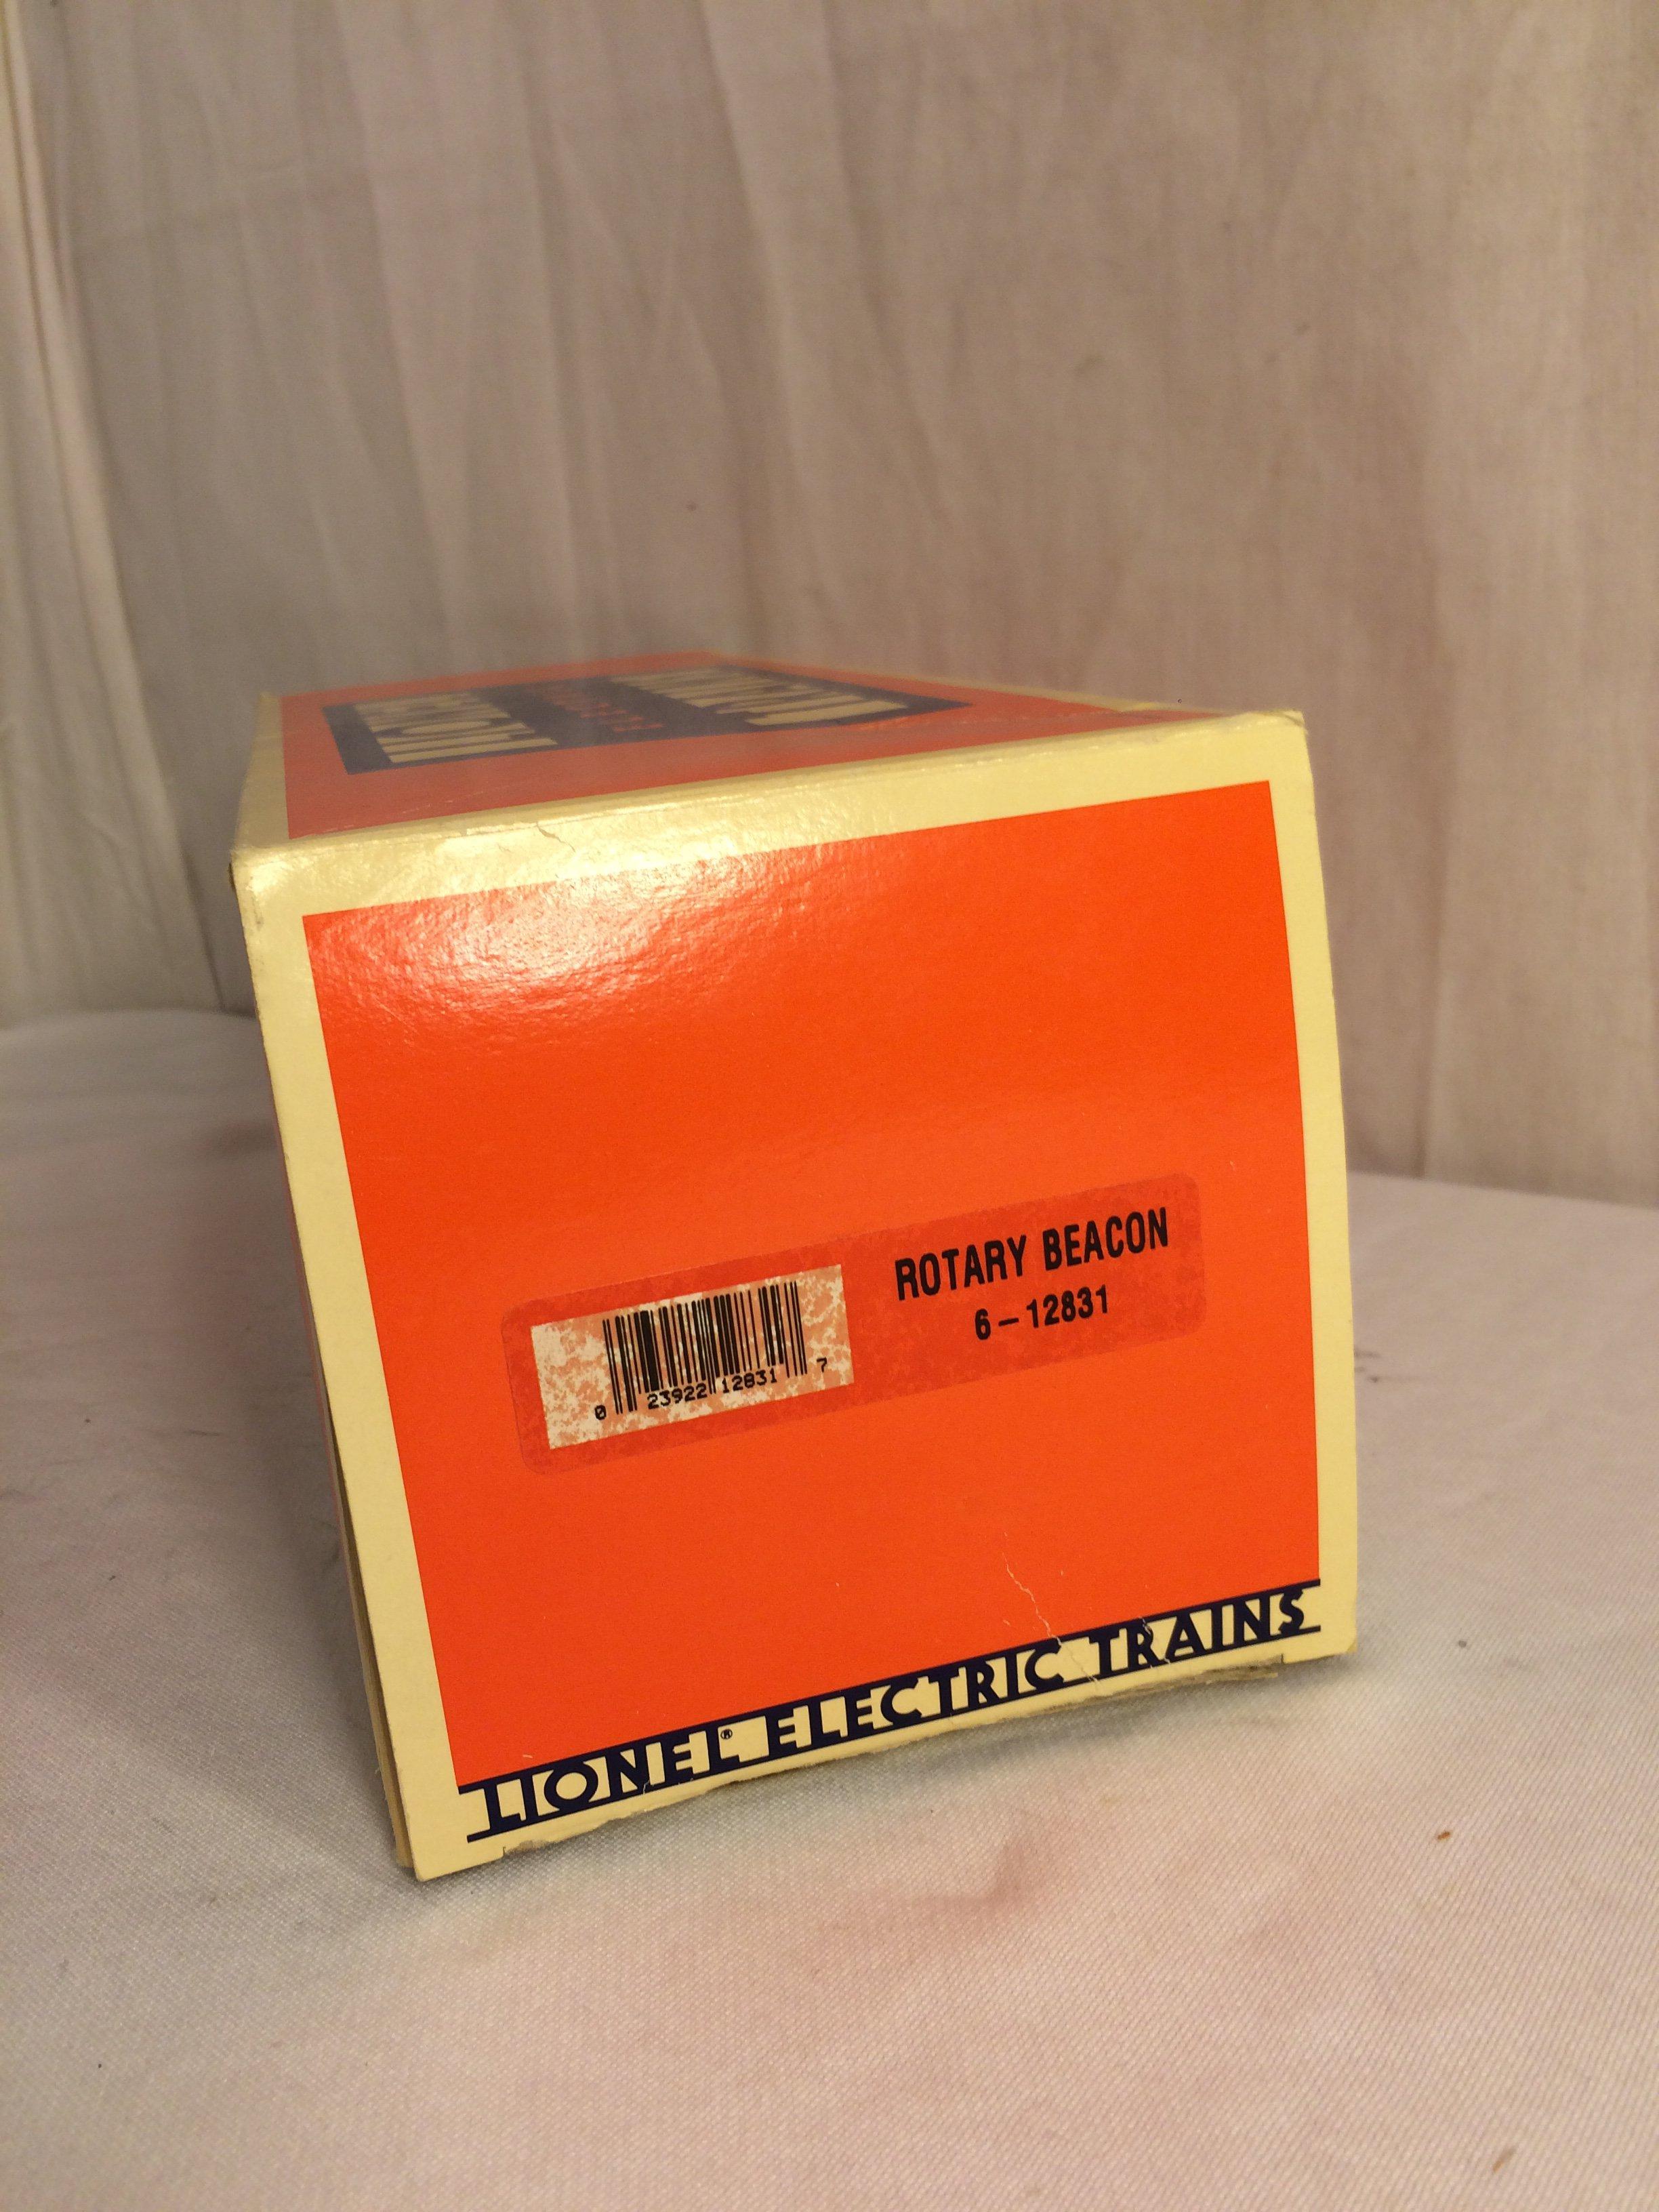 Collector Vintage Lionel Eletcric Trains "Rotary Beacon 6-12831 Box Size:13.1/2" Long by 5" Width